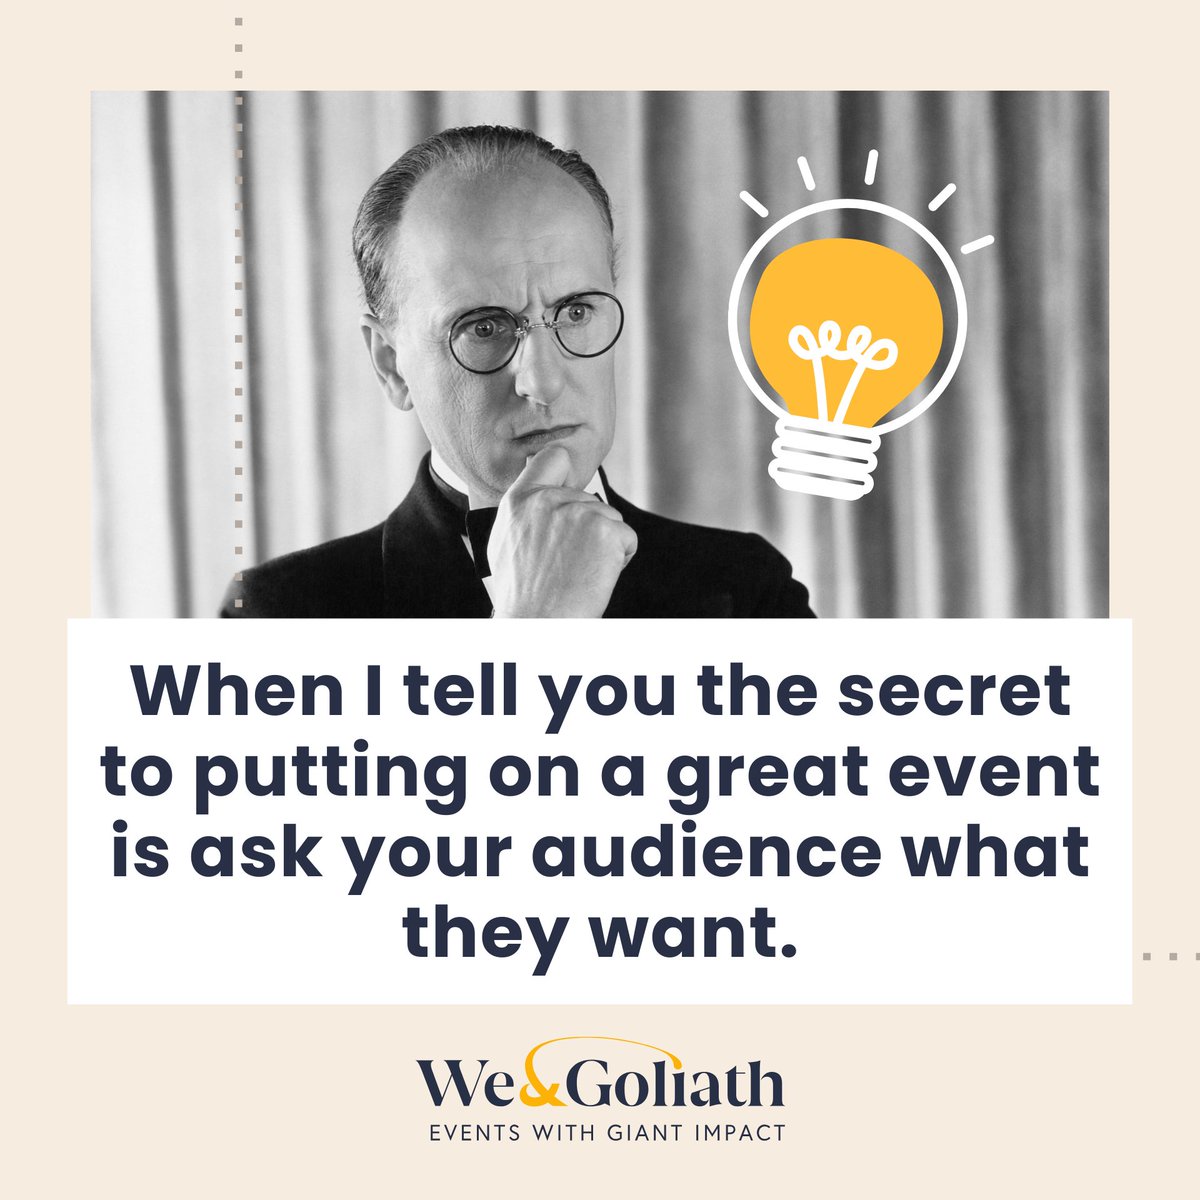 Virtual events open doors to global talent & speaker lineups! Assemble the brightest minds from around the world with ease. Book your FREE Session today: visit.weandgoliath.com/freesession
#EventMarketing #EventIndustry #HybridEvents